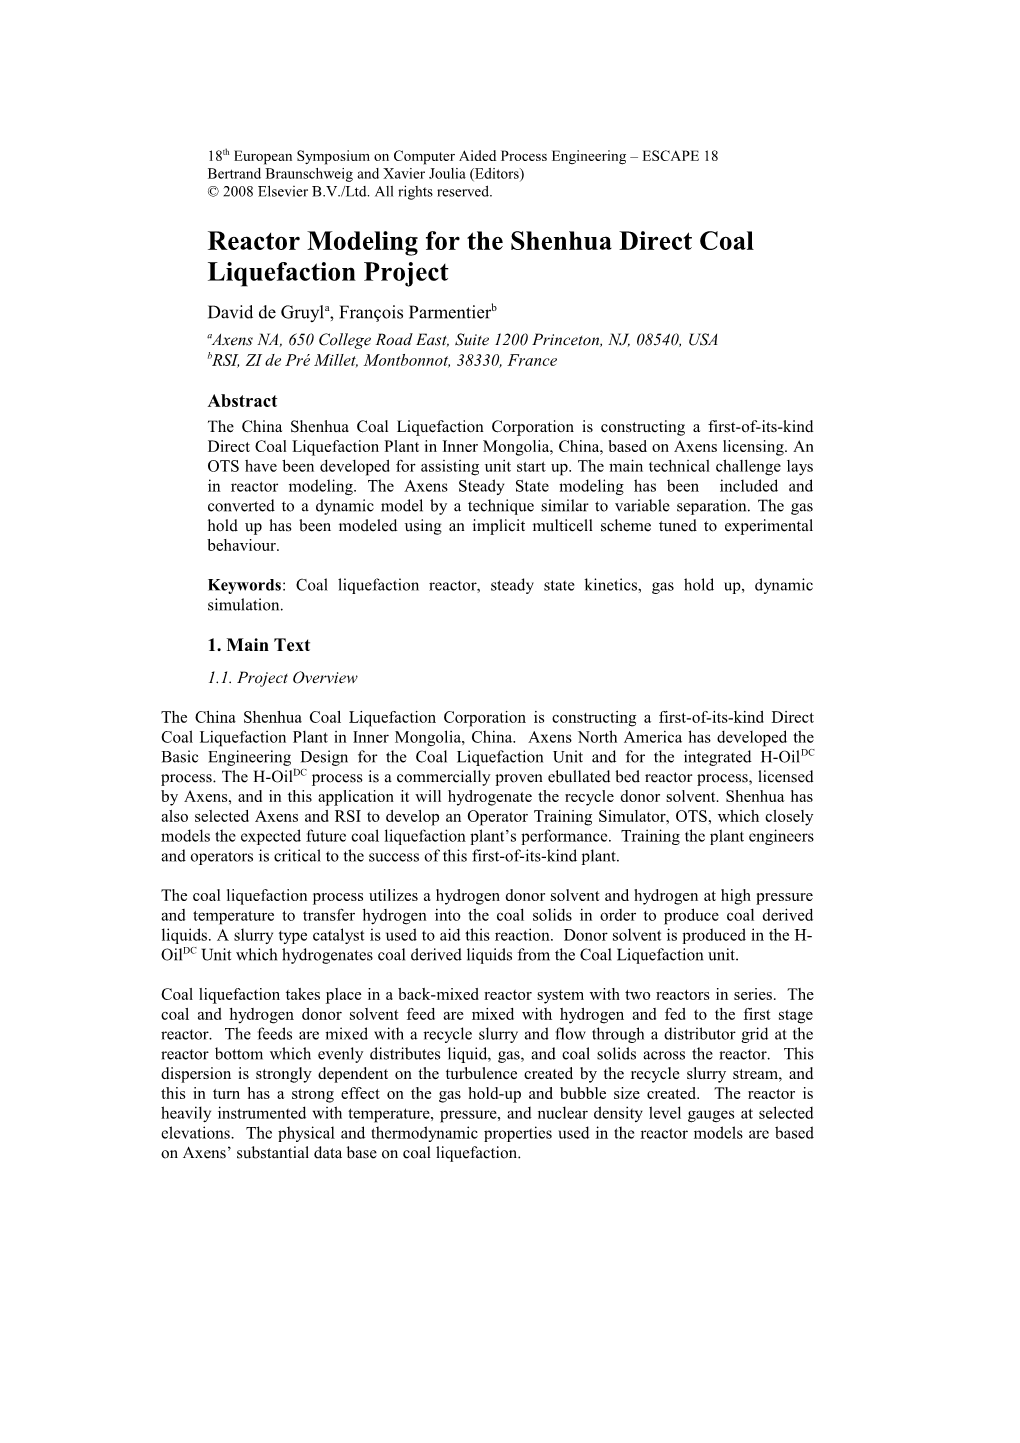 Reactor Modeling for the Shenhua Direct Coal Liquefaction Project